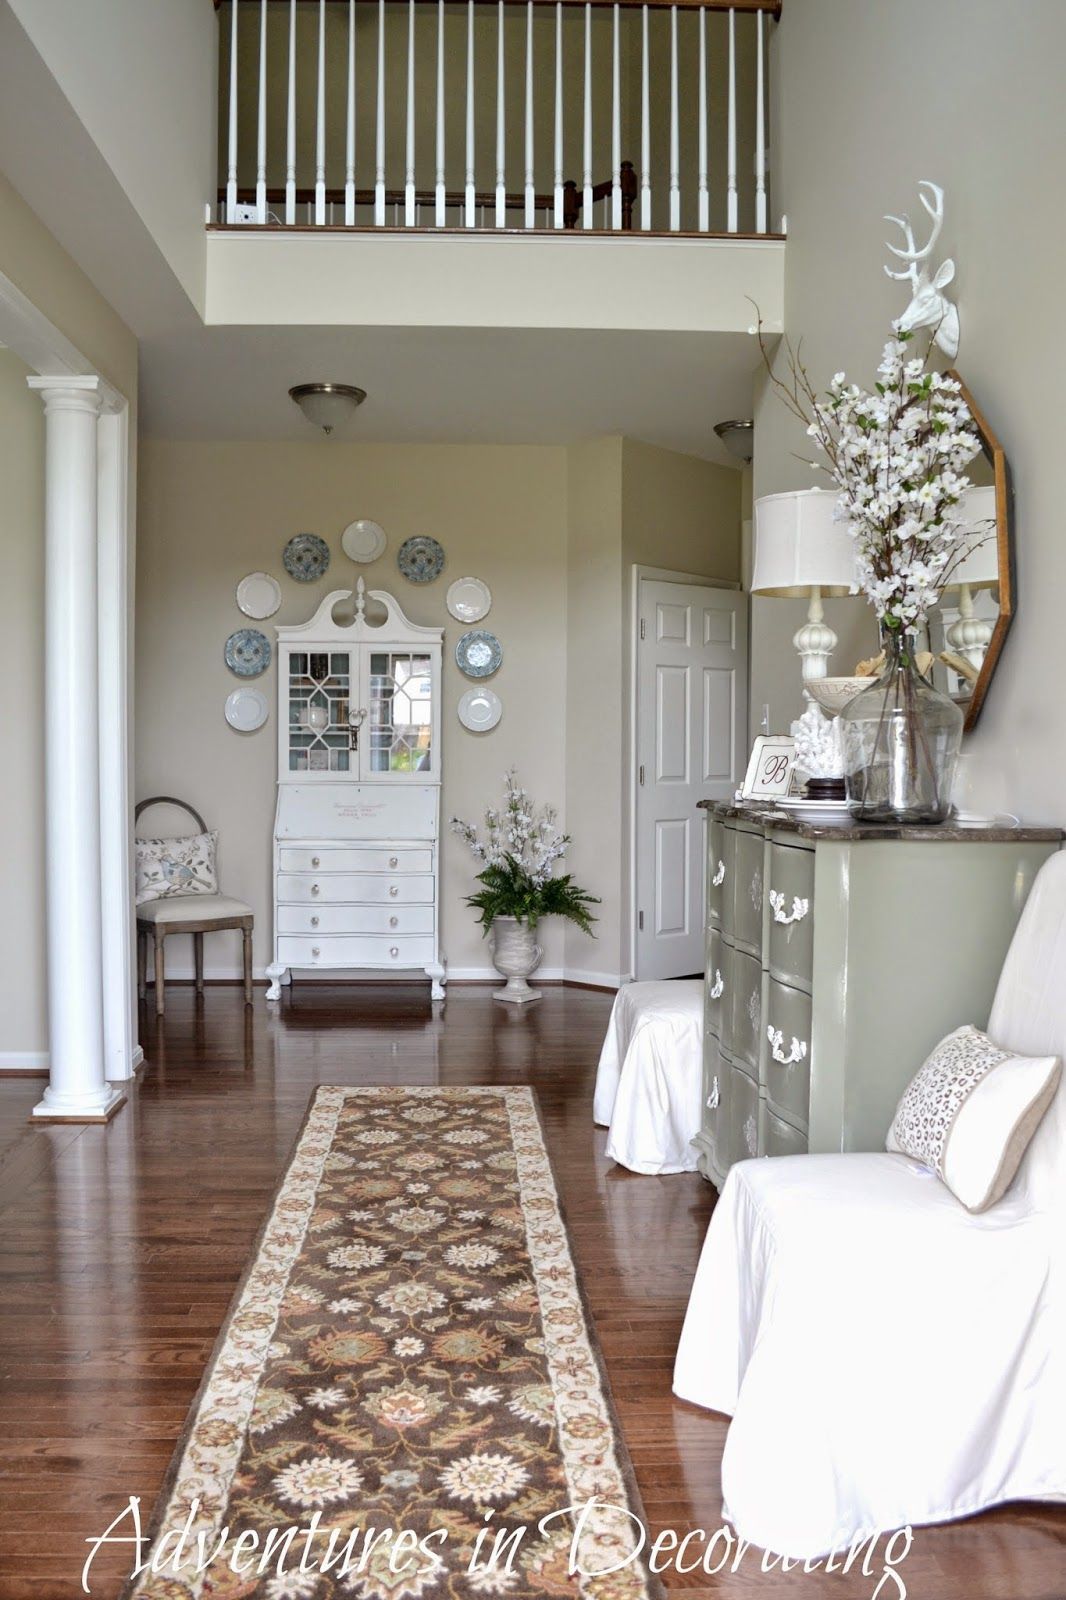 Gorgeous entryway and calming color scheme.